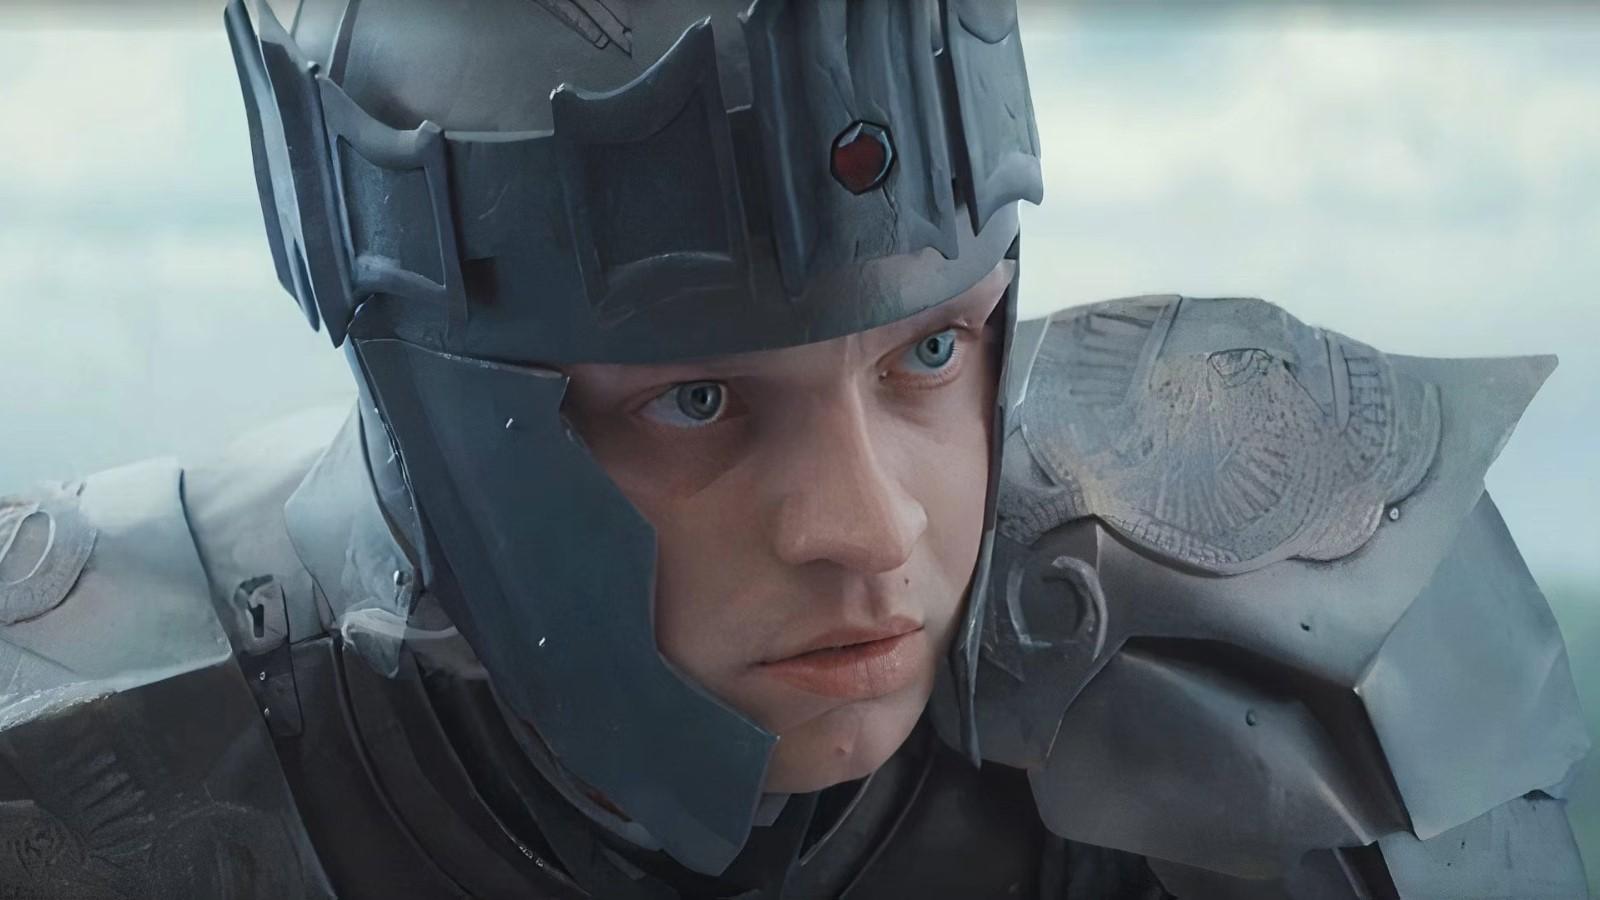 Tom Glynn-Carney as Aegon in House of the Dragon wearing his battle armor on top of a dragon